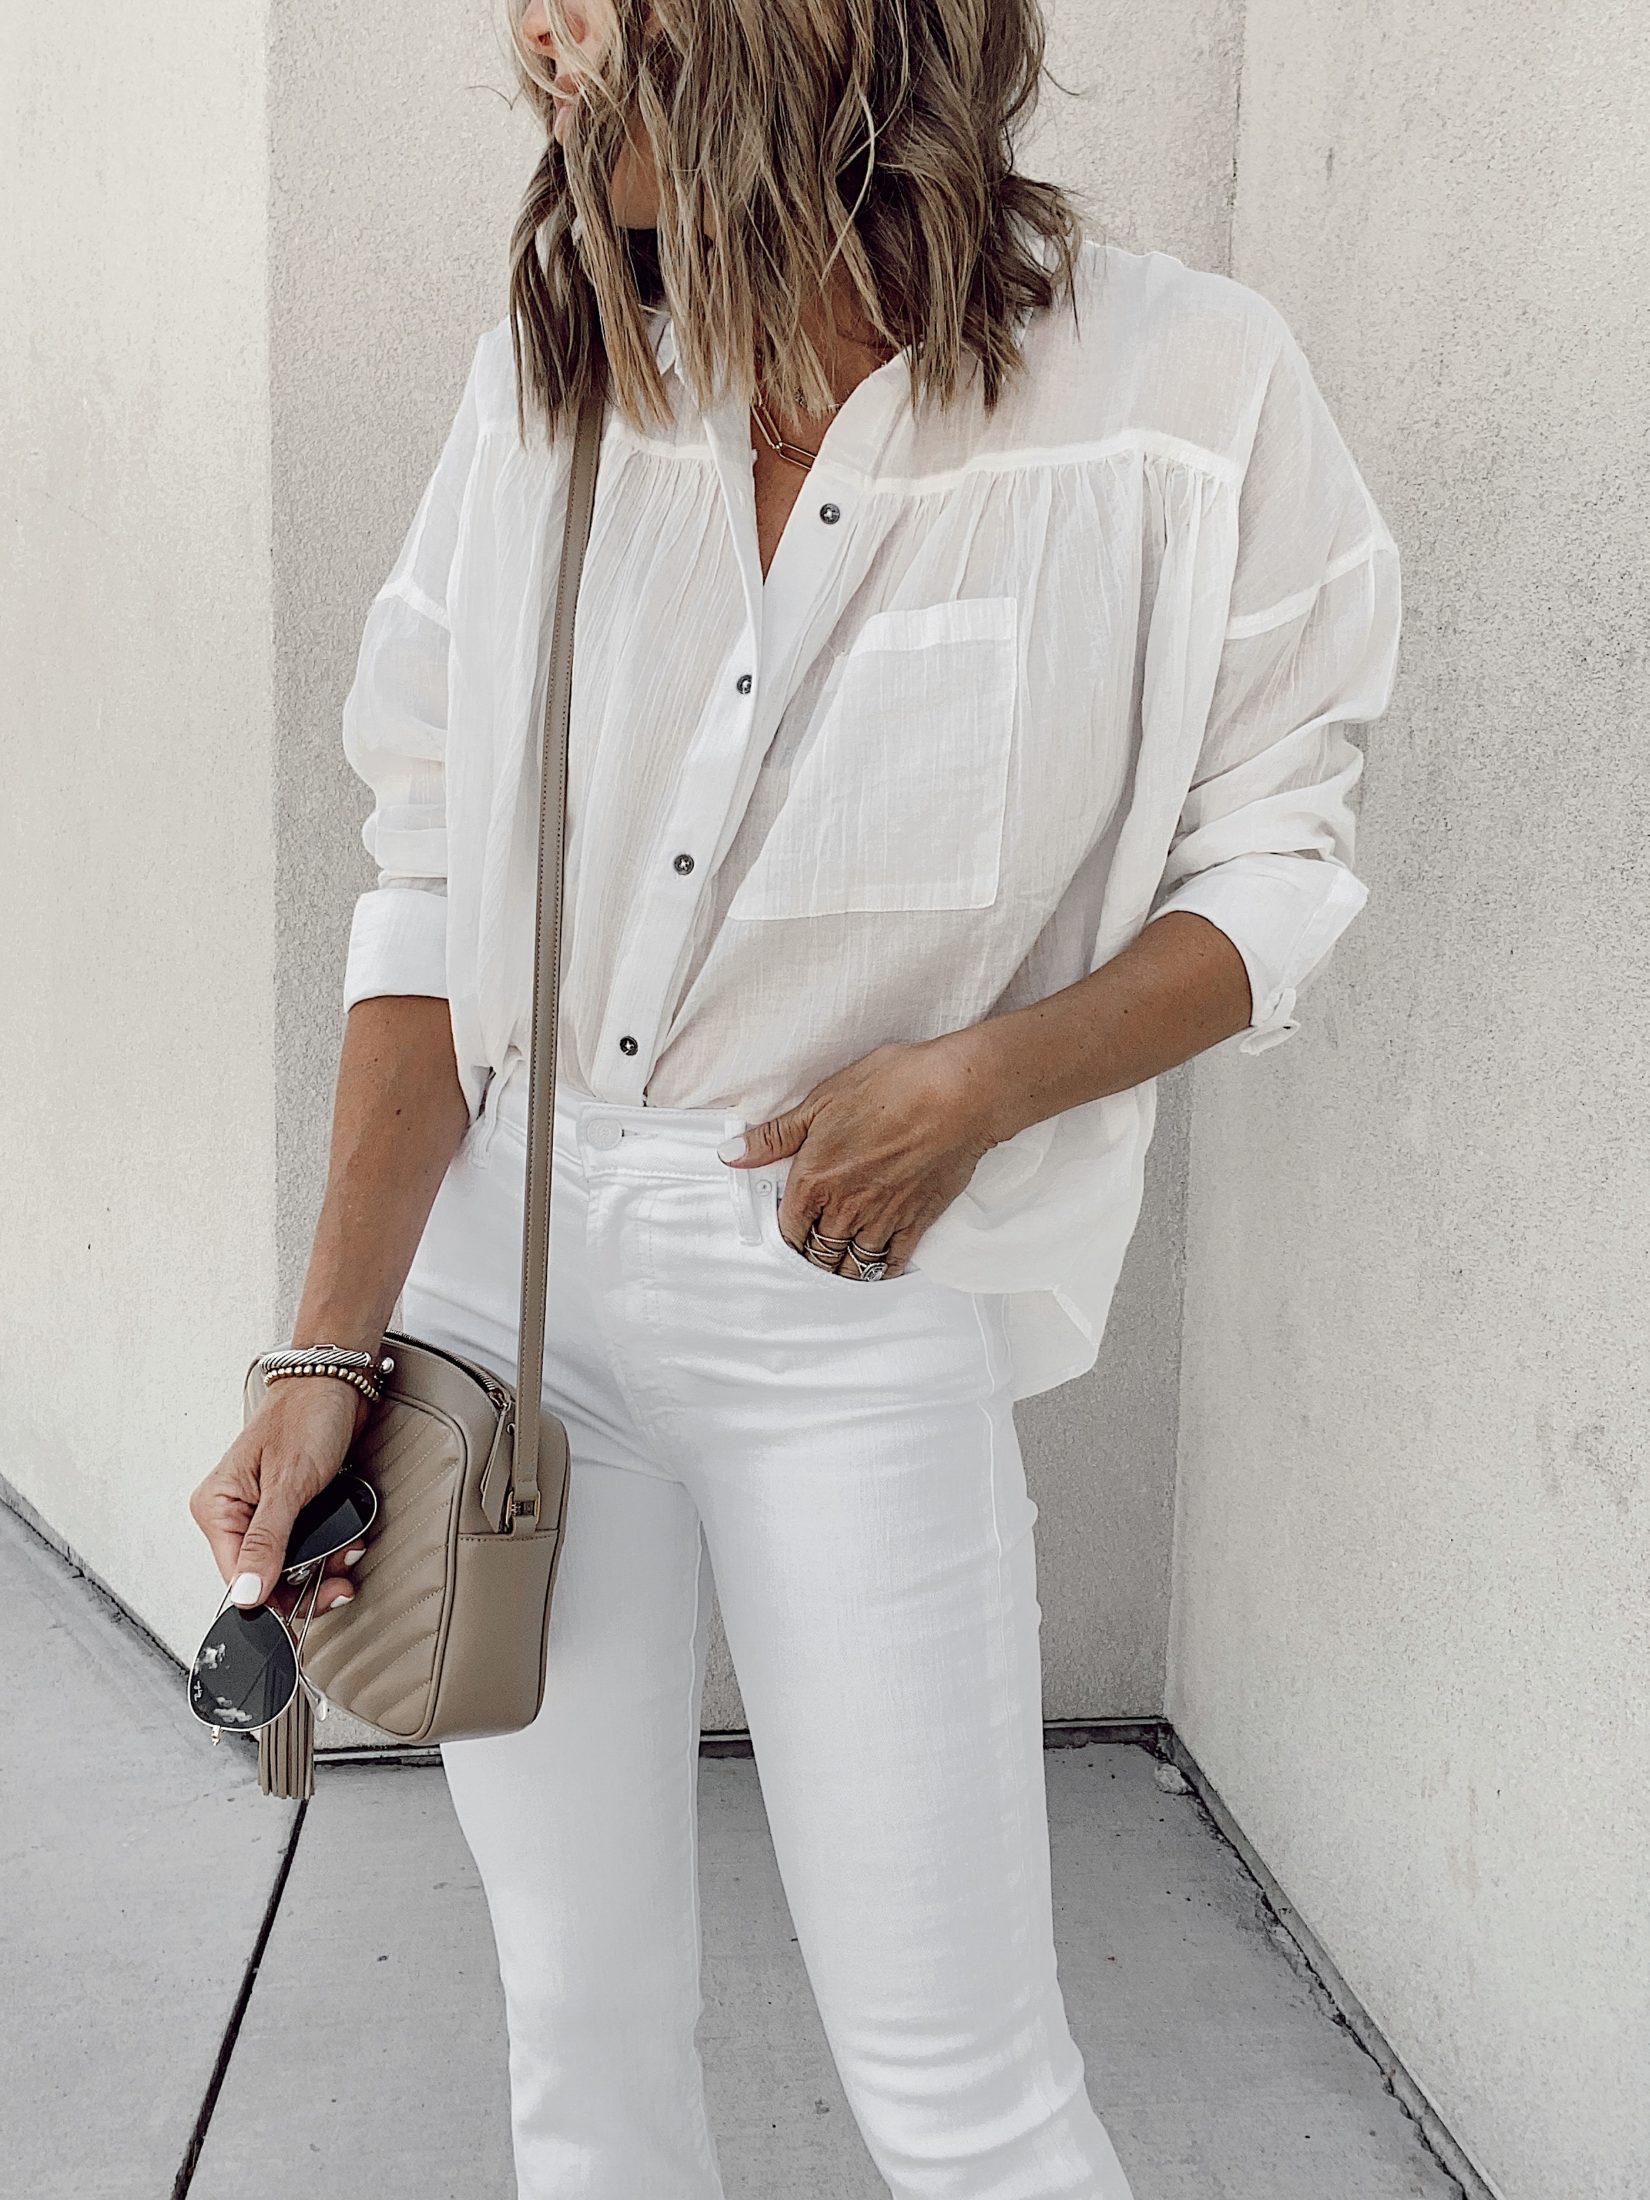 all white outfit ideas for women